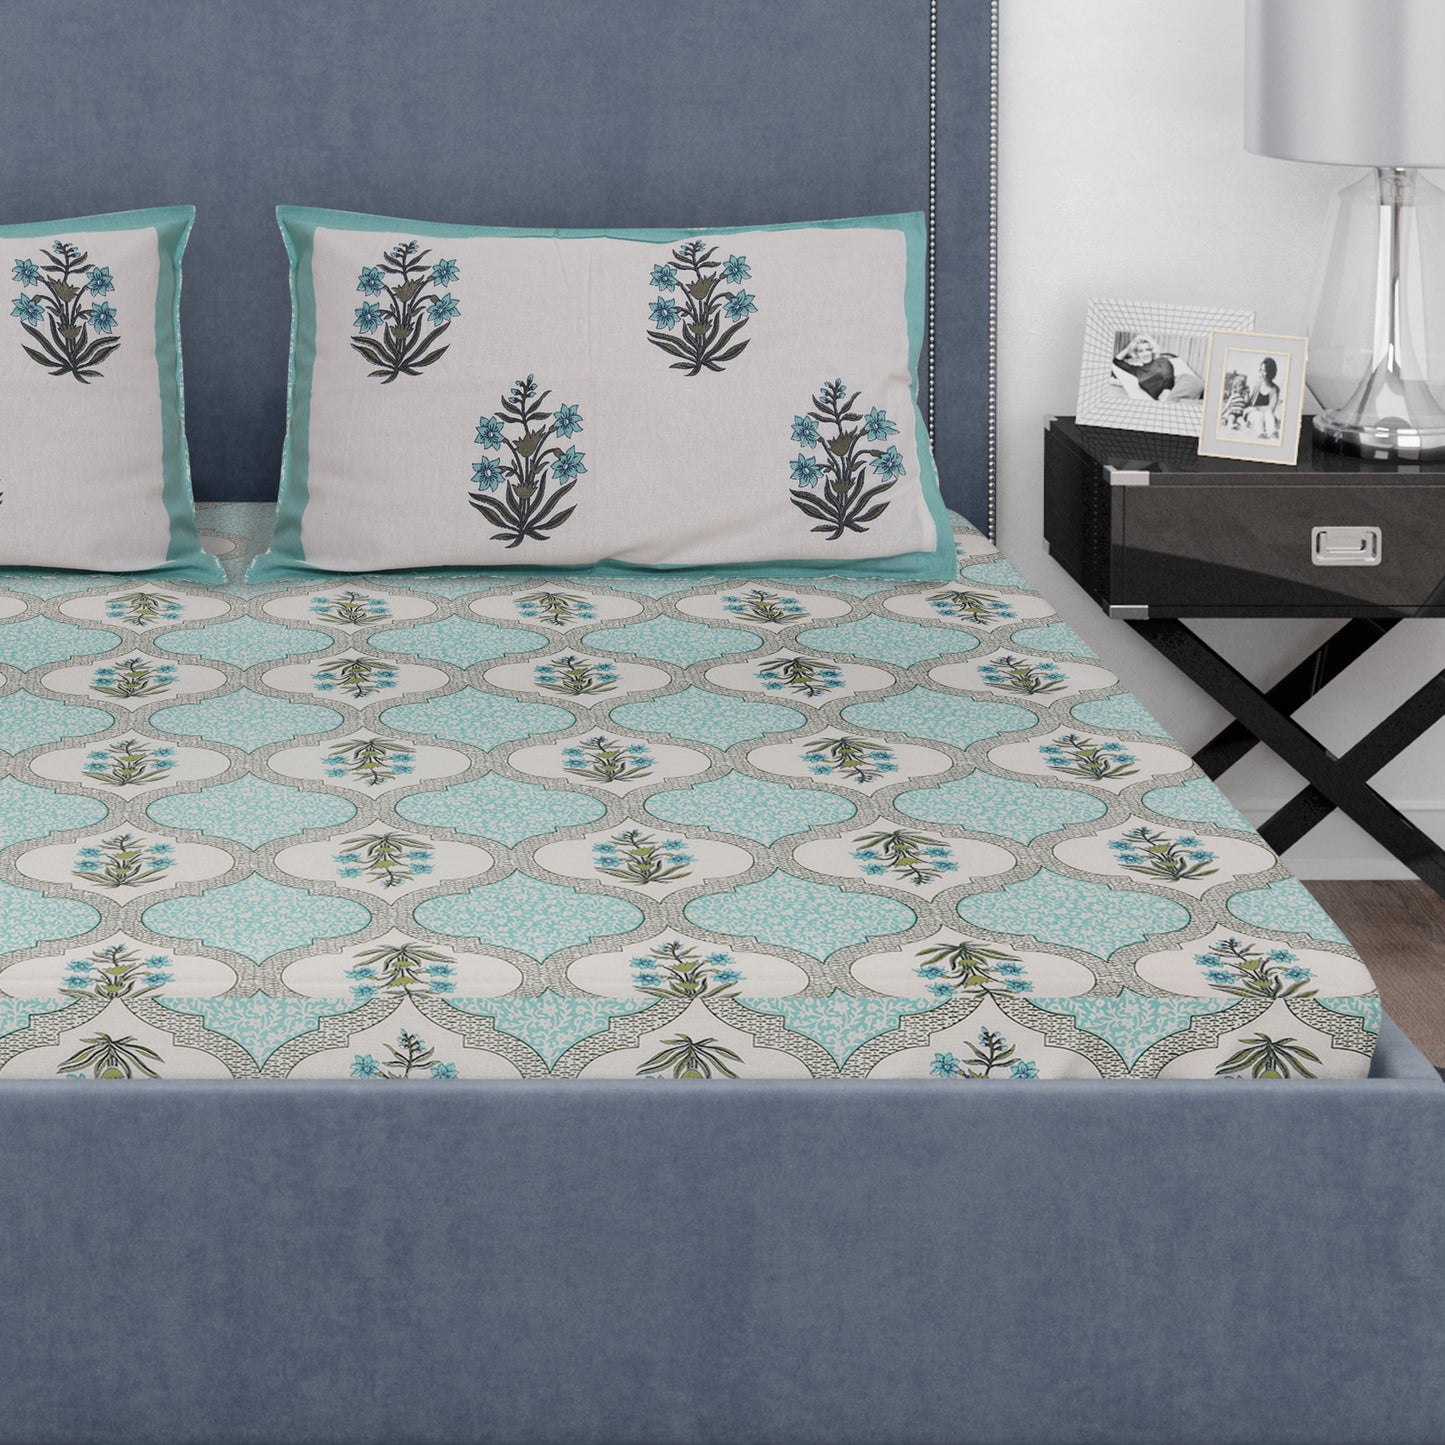 Zoya Turquoise 100% Cotton Bedsheet with 2 Pillow Covers - King Size, 108 in x 93 in